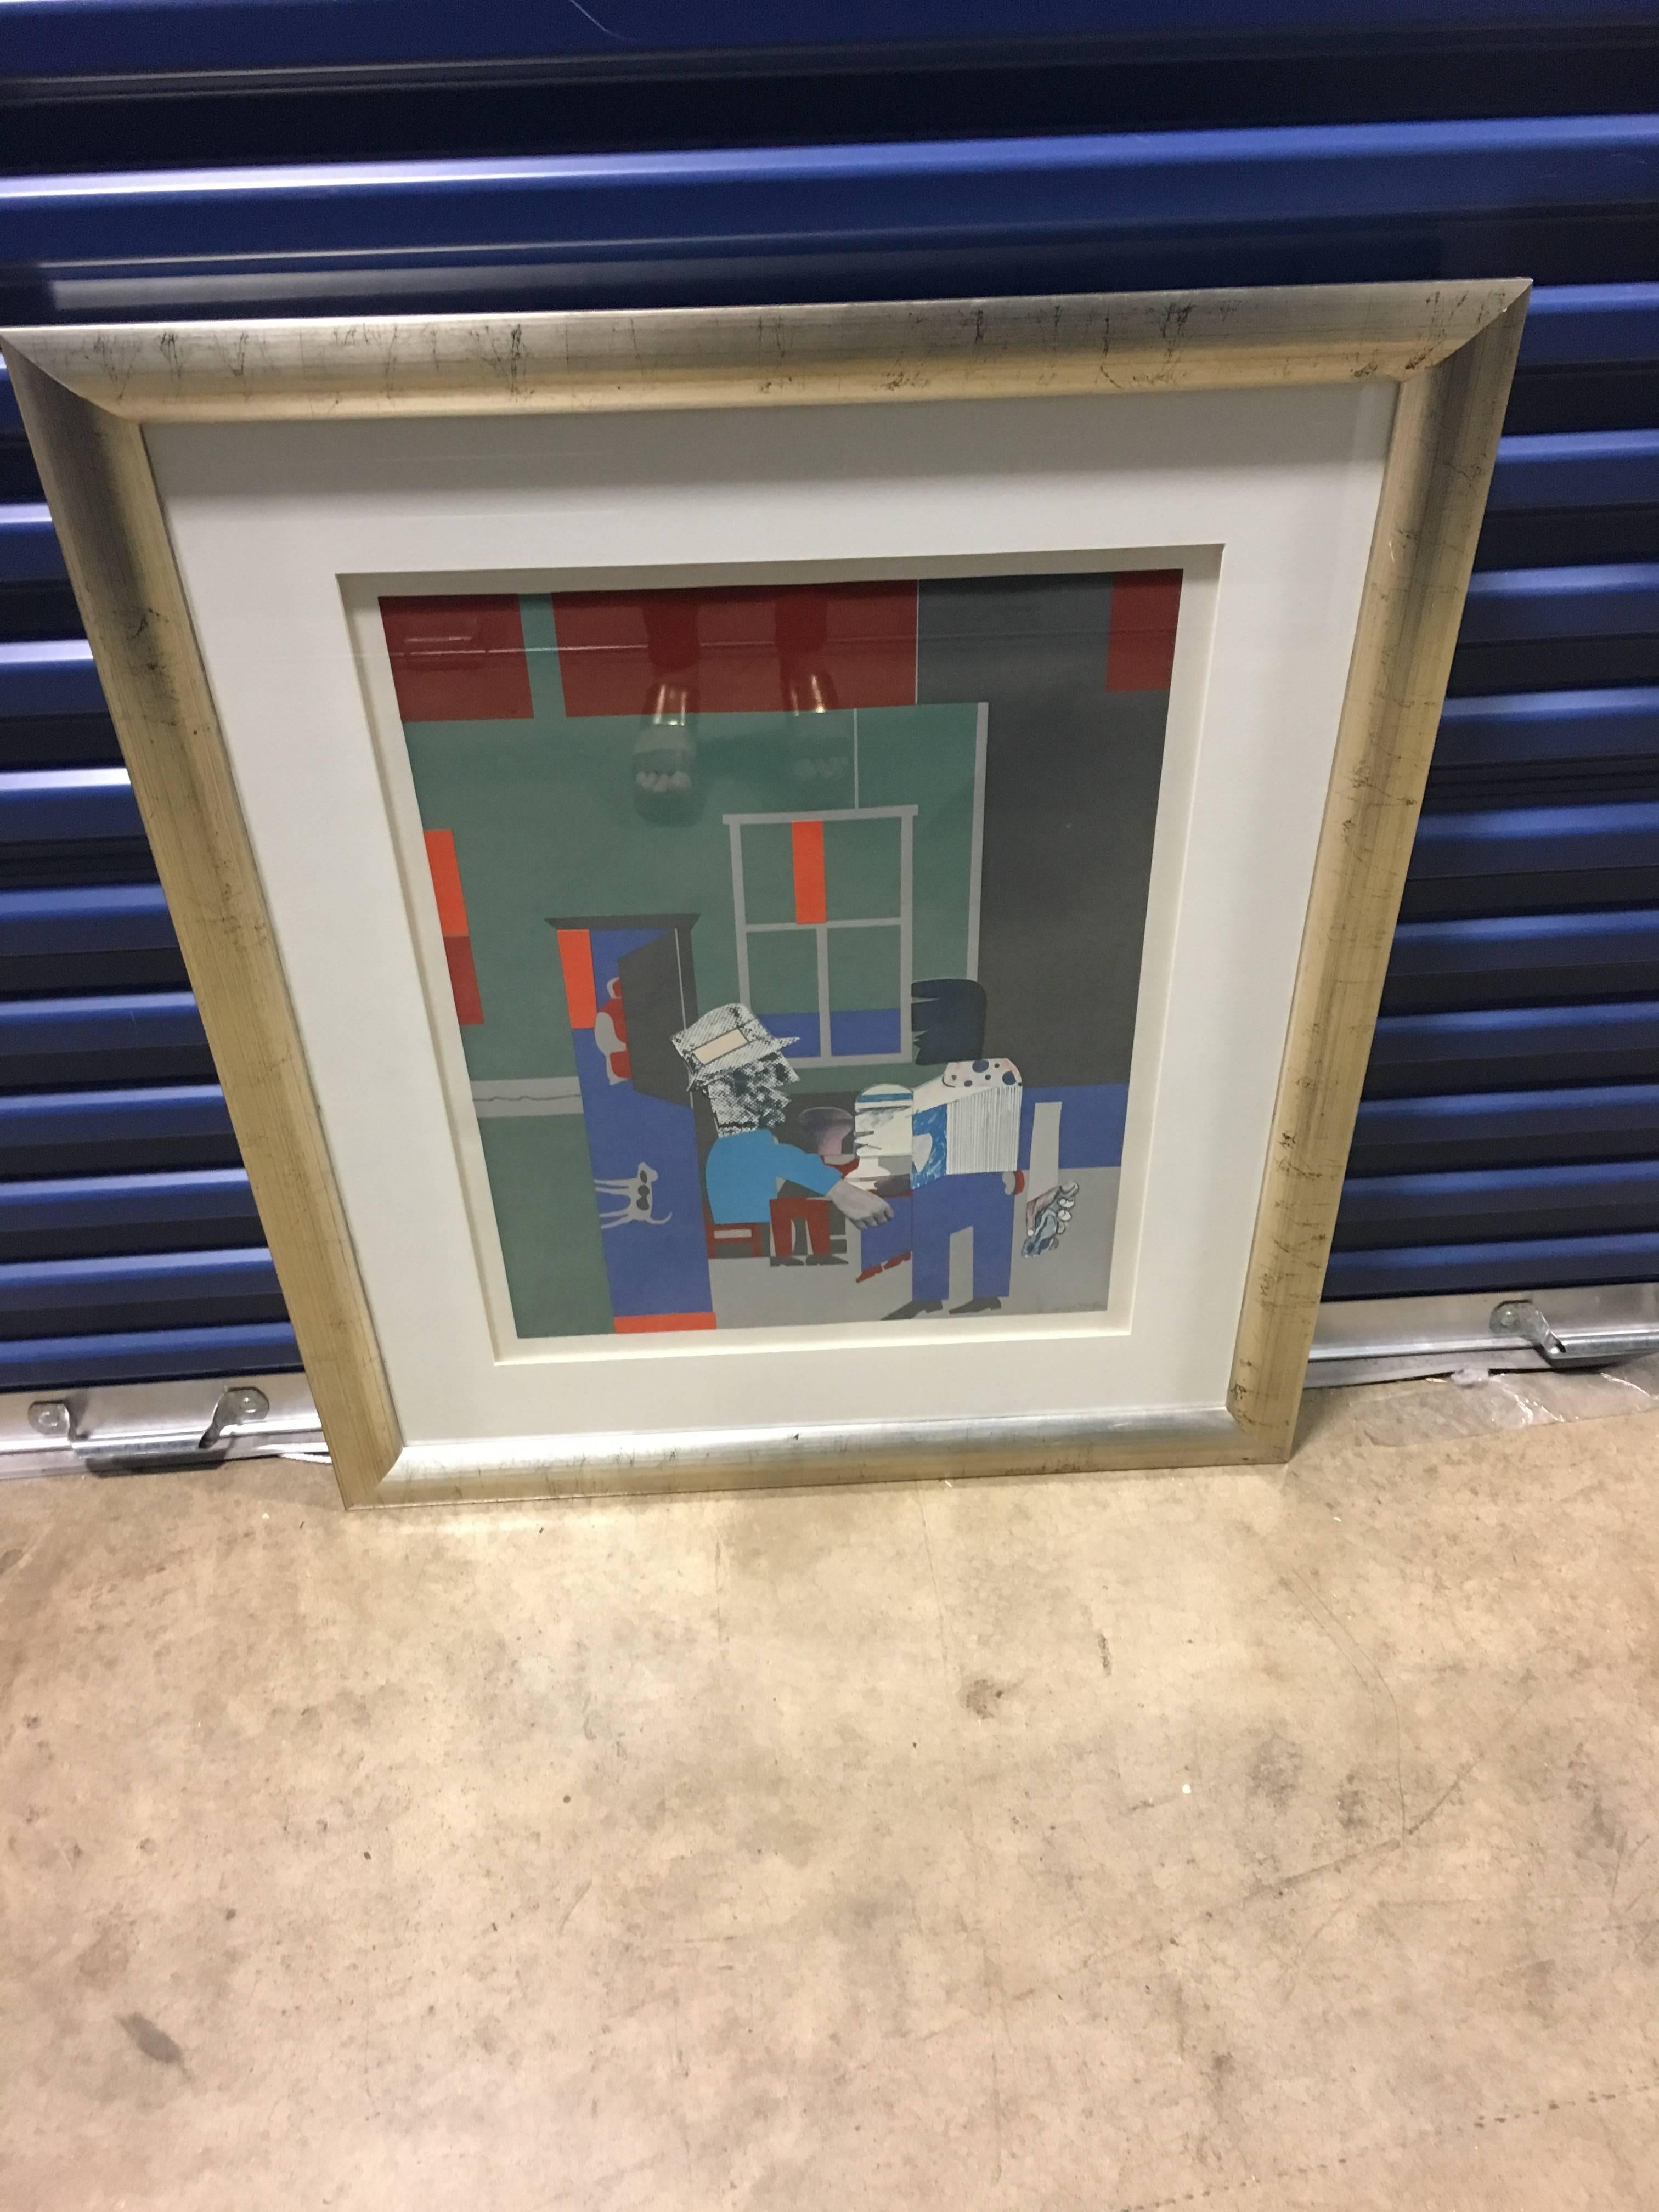 CAROLINA BLUE, 1970, Interior is a screen printed piece with collage elements. Cubist style figures dominate the composition in varying shades of blue, teal, grey, and crimson. The piece is matted and framed. 

The piece is signed and numbered in